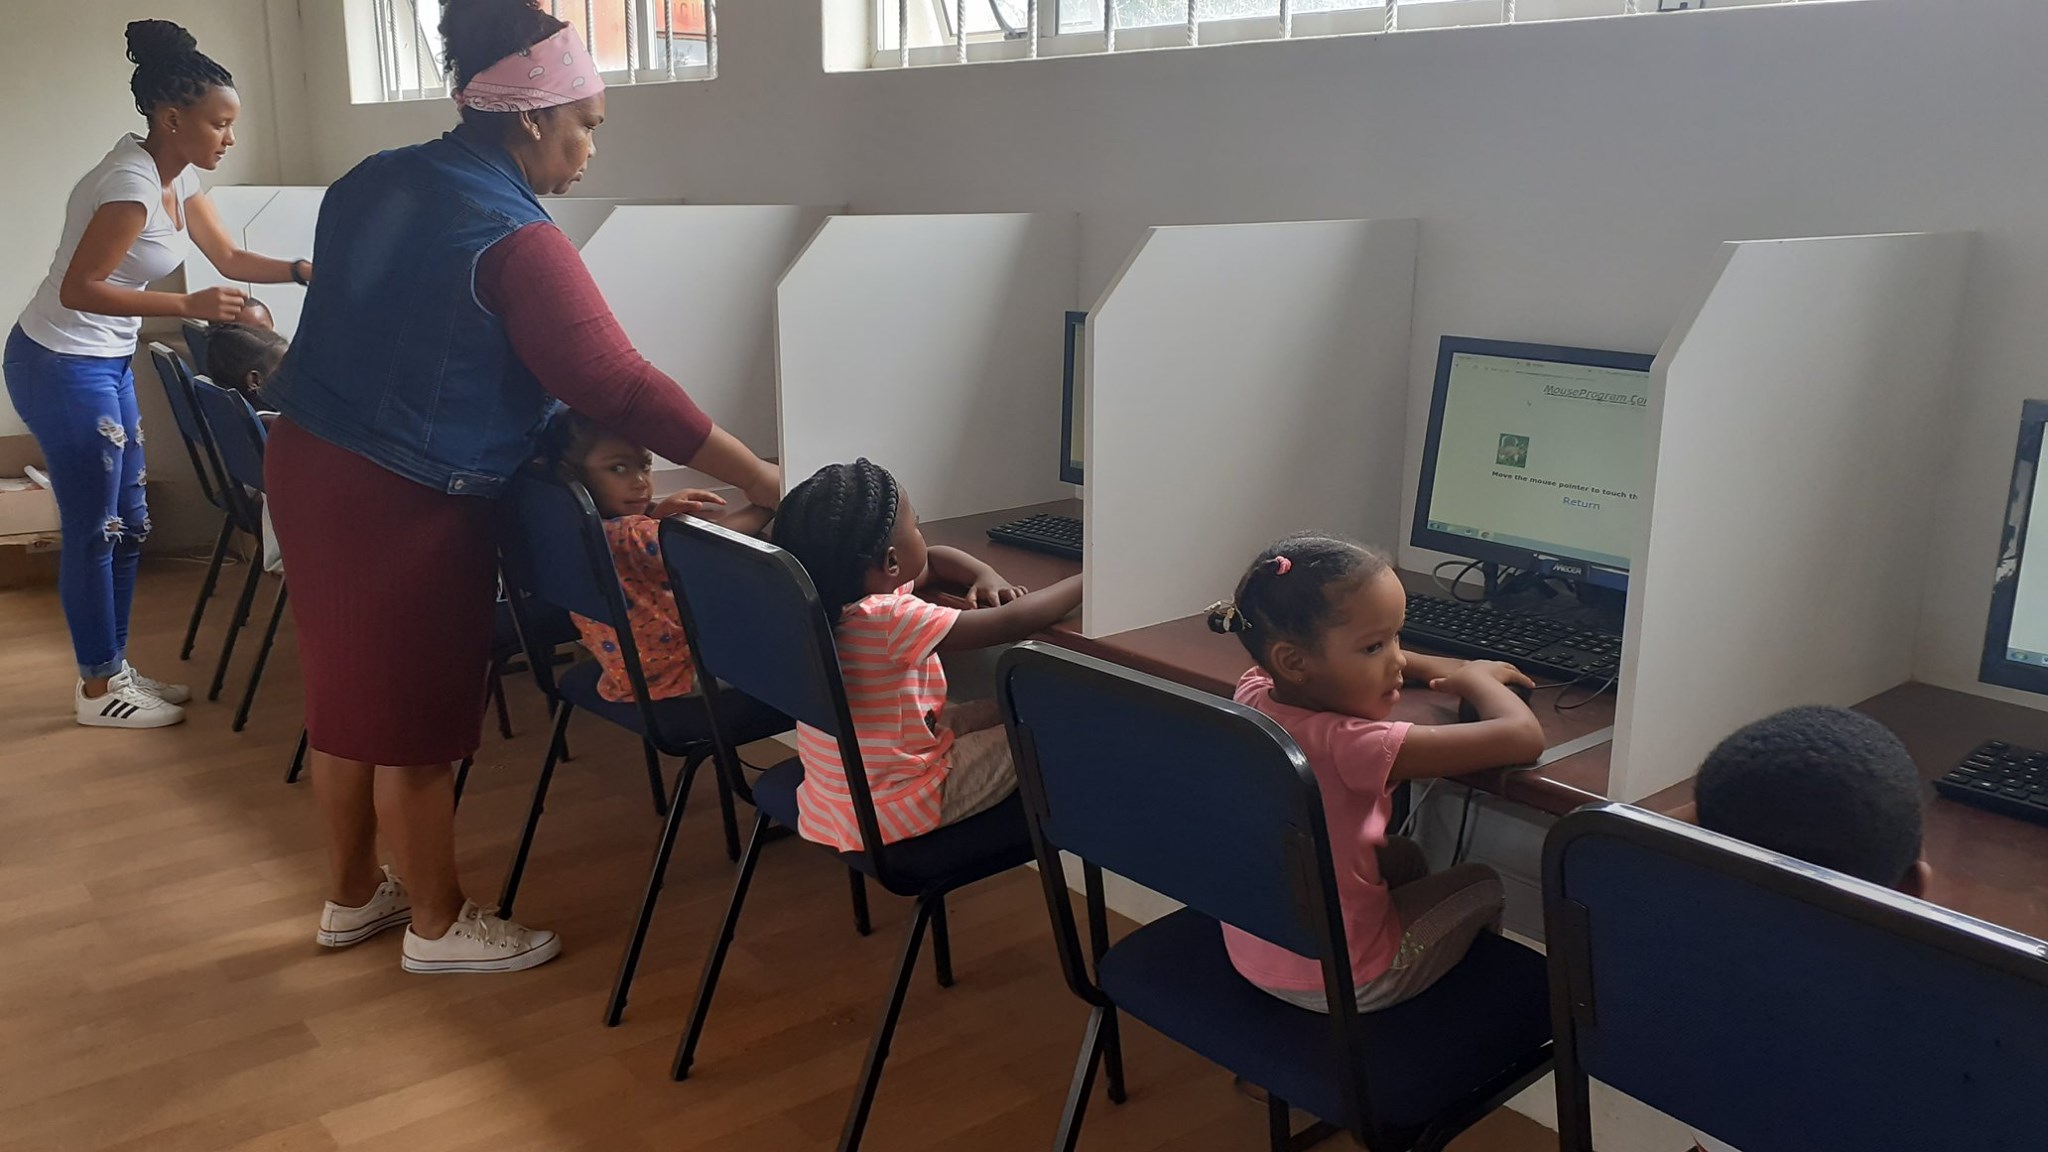 Visitors use computers at Riebeeck Kasteel eCentre